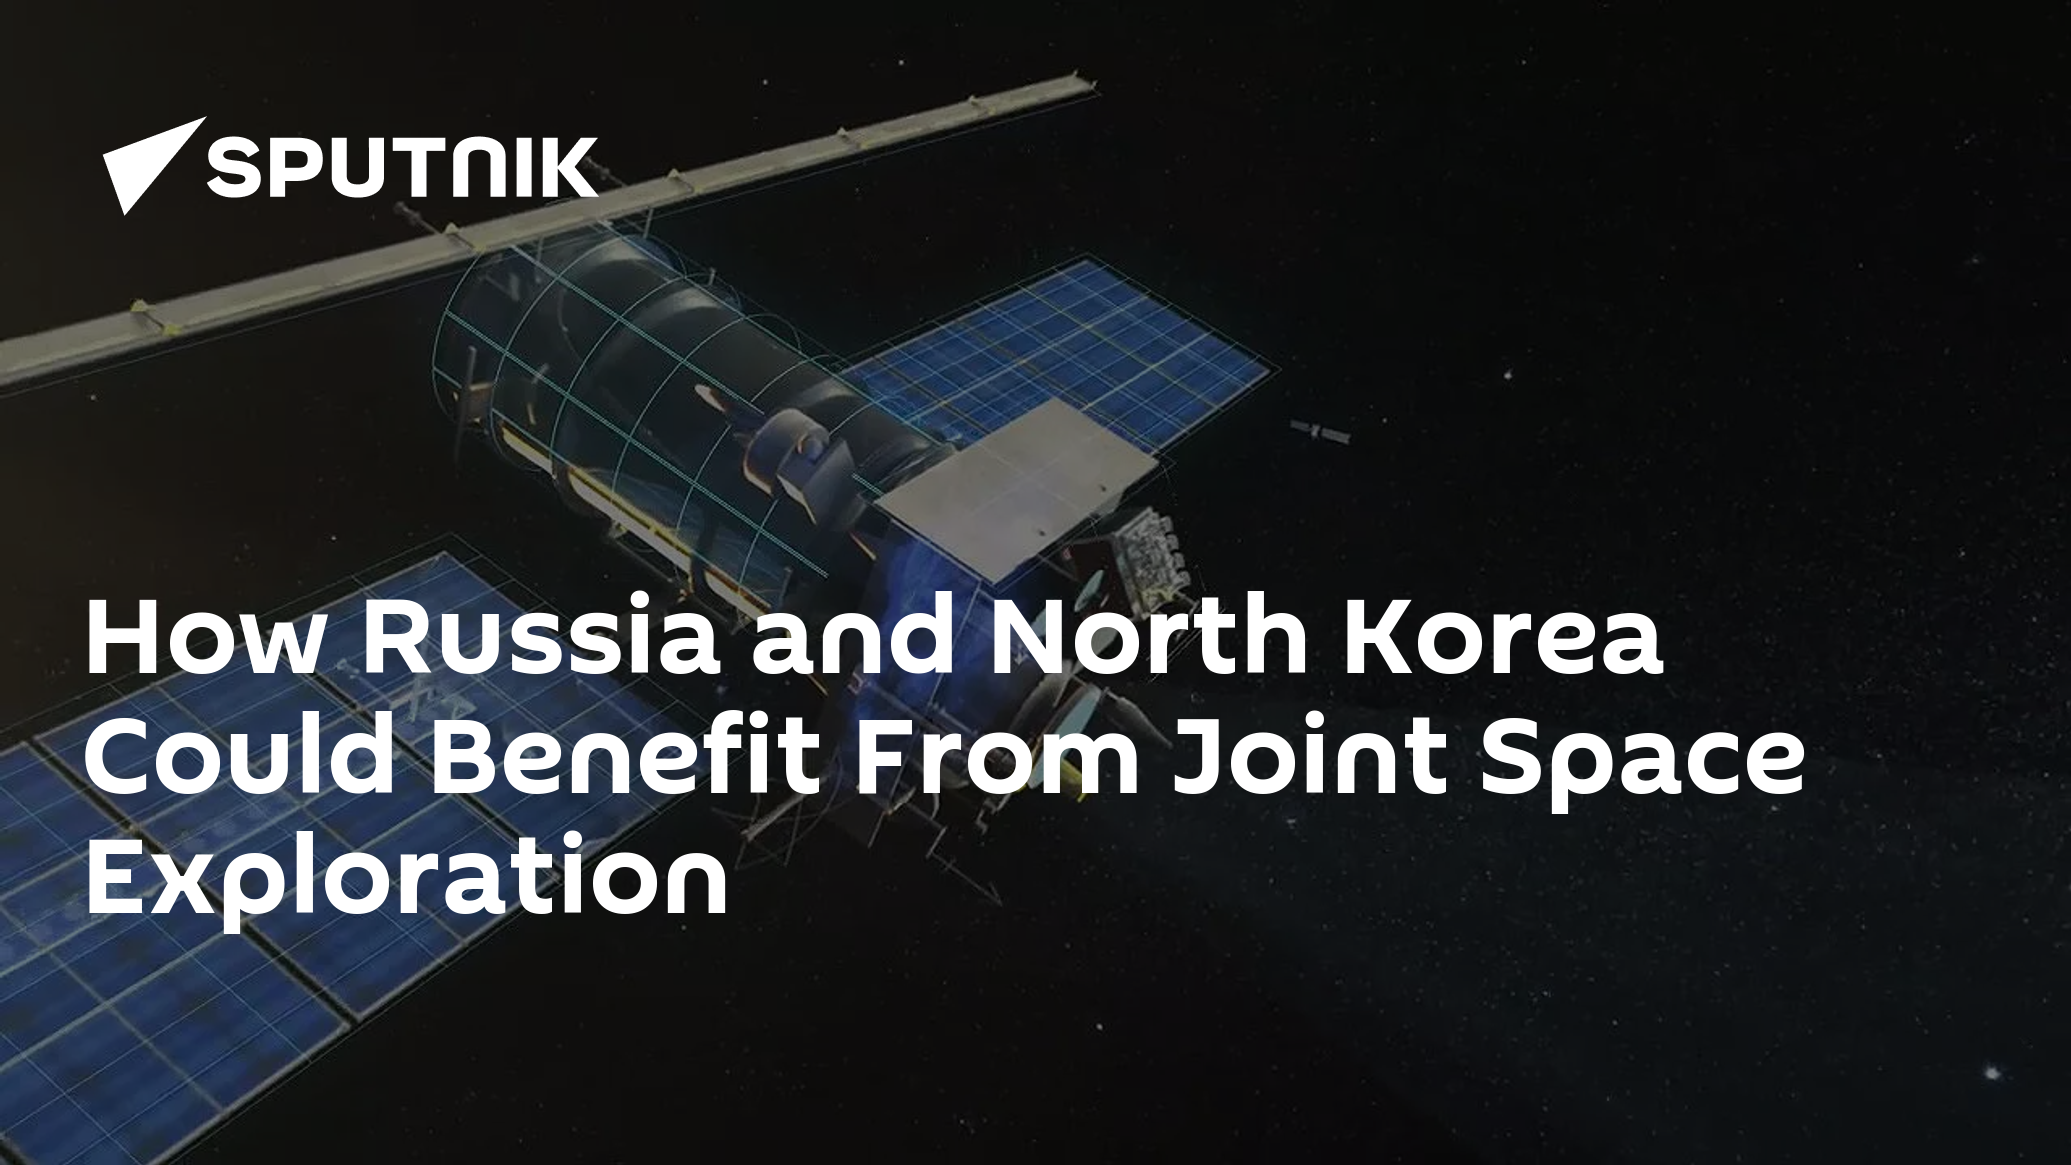 How Russia and North Korea Could Benefit From Joint Space Exploration